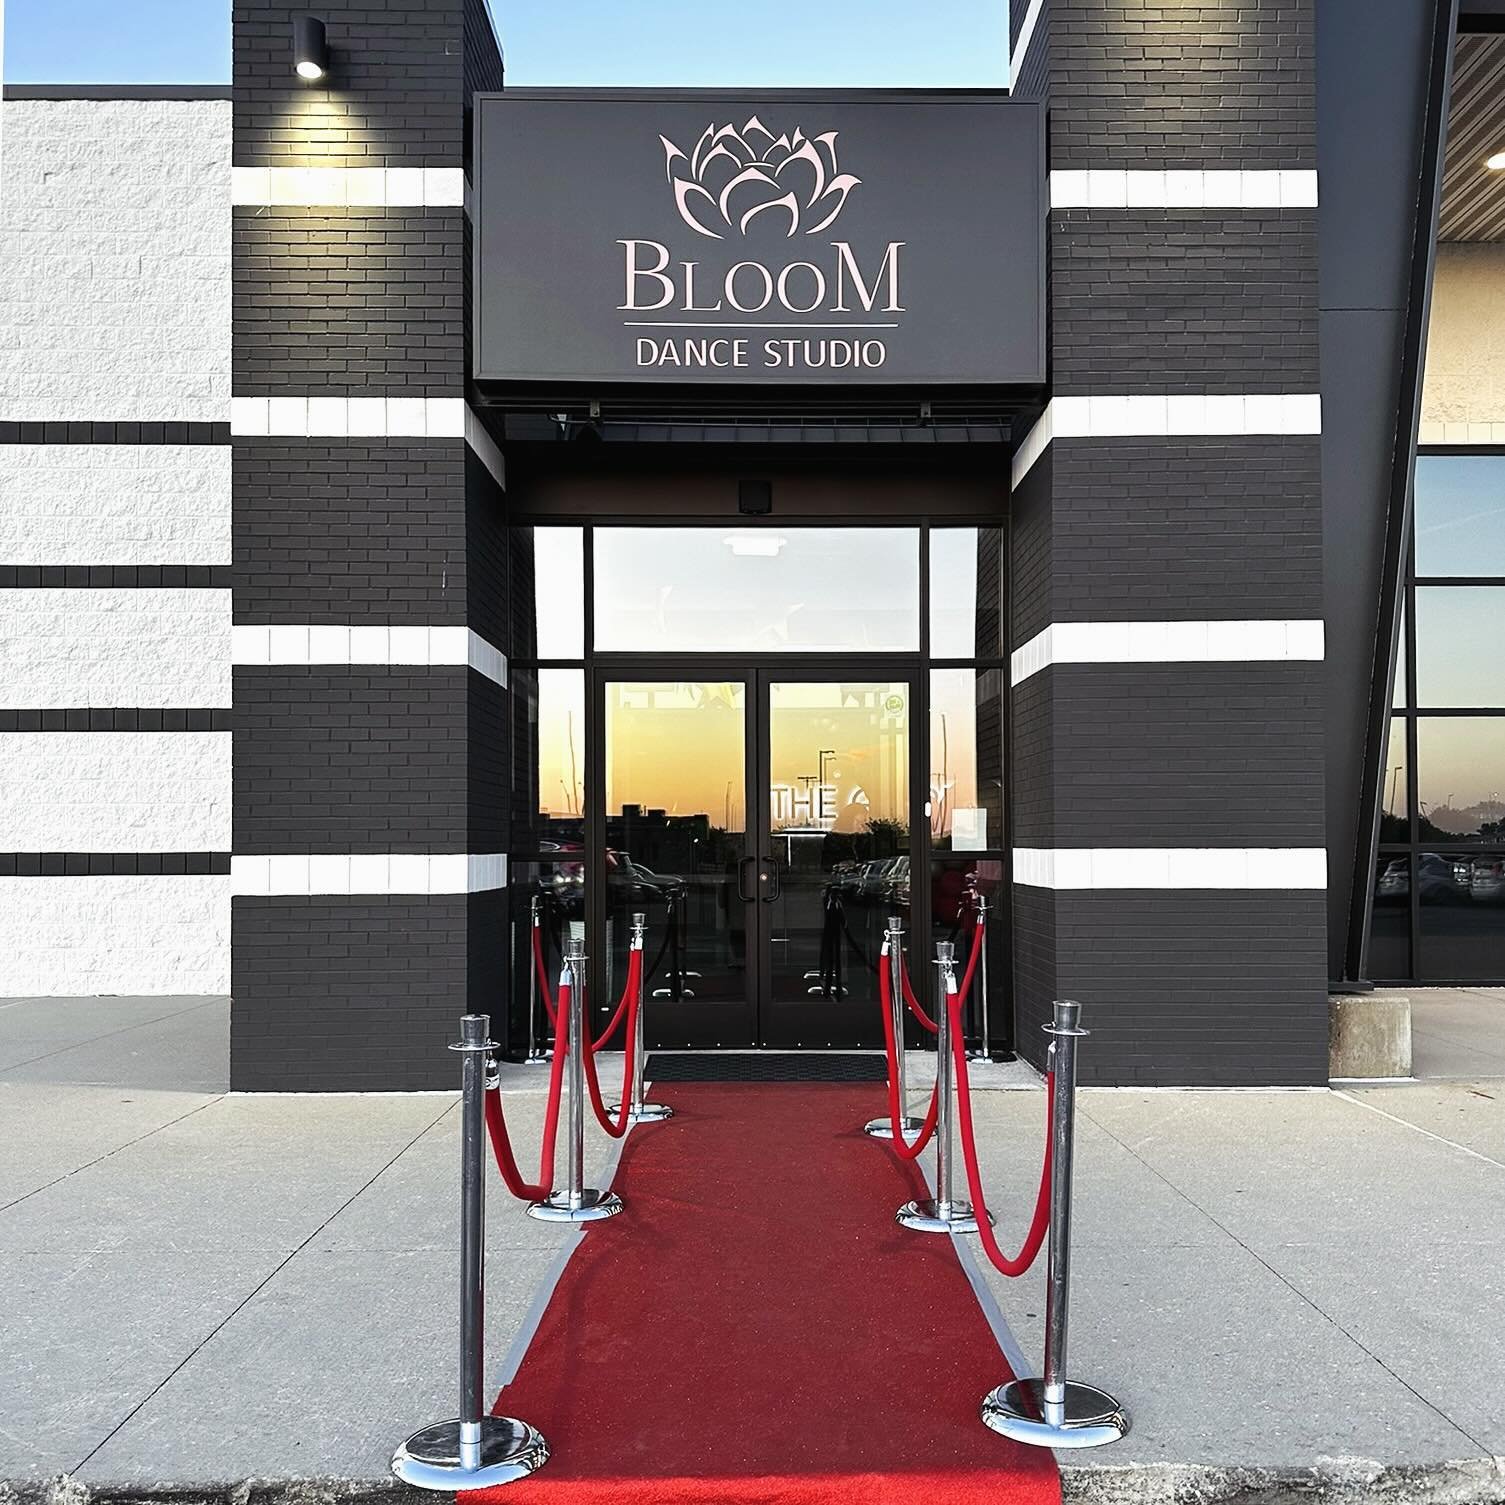 Ready to walk the red carpet? 🍿 Join us today for Bloom at the Movies Oakview spring recital show! Some performances are sold out&hellip; Grab your tickets at the door! 🎟️ 

See showtimes at danceatbloom.com.